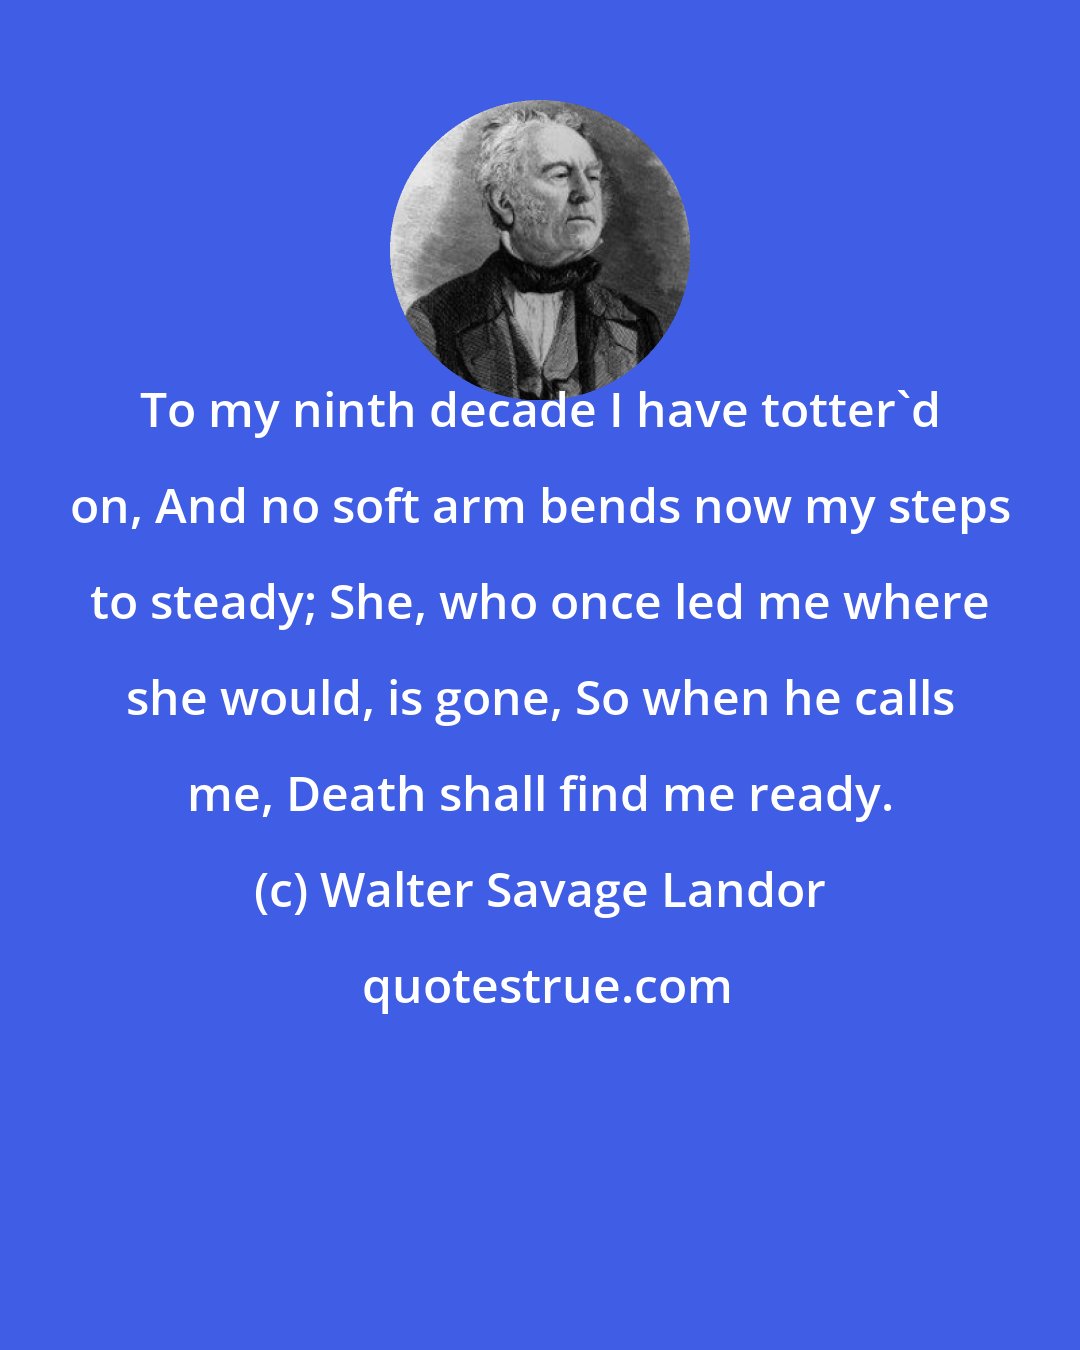 Walter Savage Landor: To my ninth decade I have totter'd on, And no soft arm bends now my steps to steady; She, who once led me where she would, is gone, So when he calls me, Death shall find me ready.